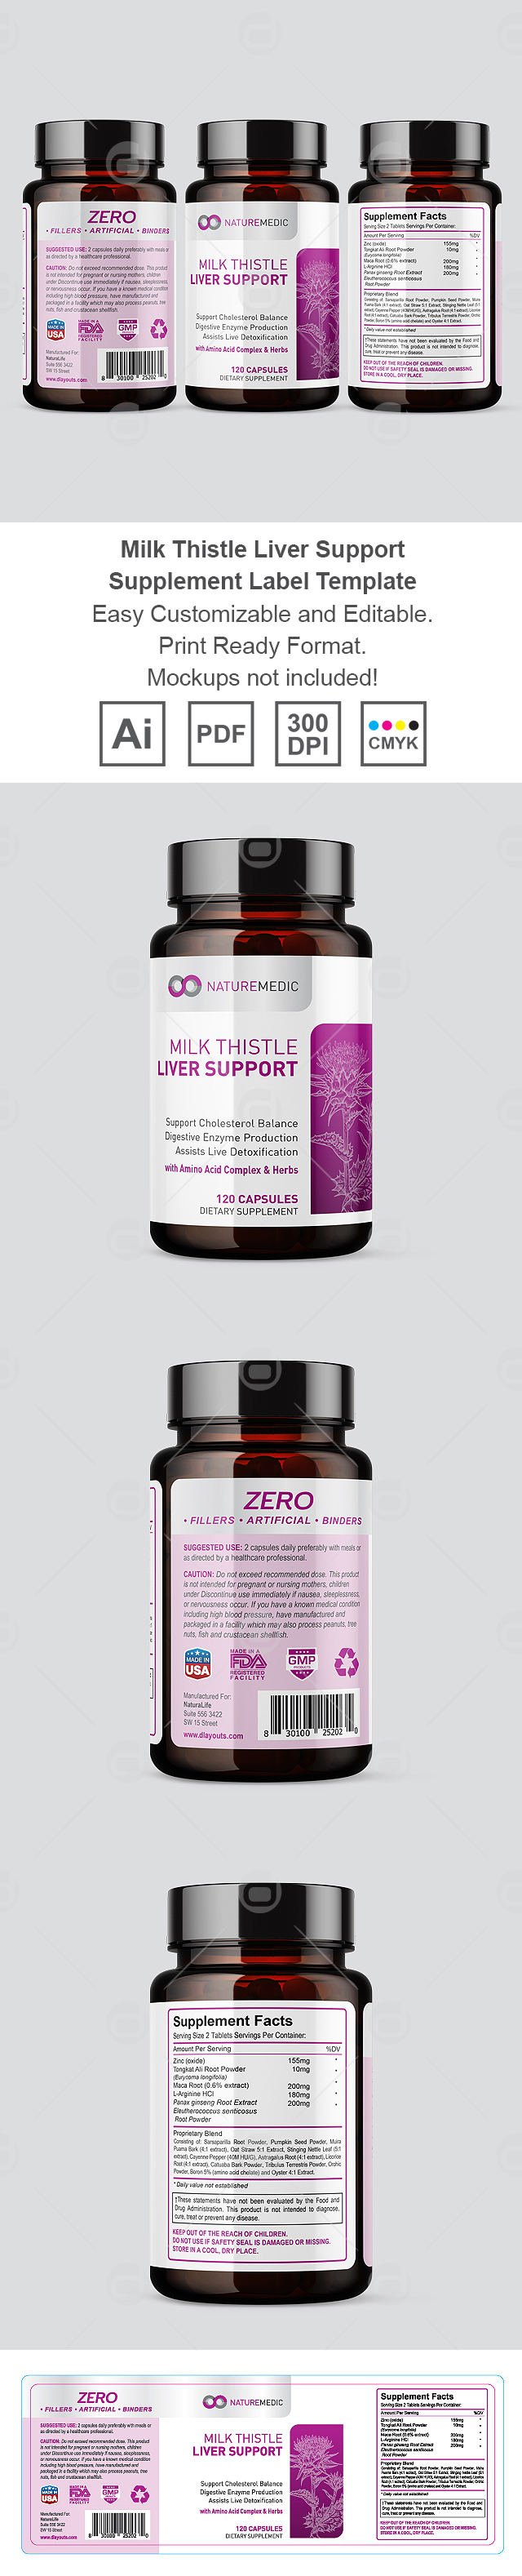 Milk Thistle Liver Support Label Template